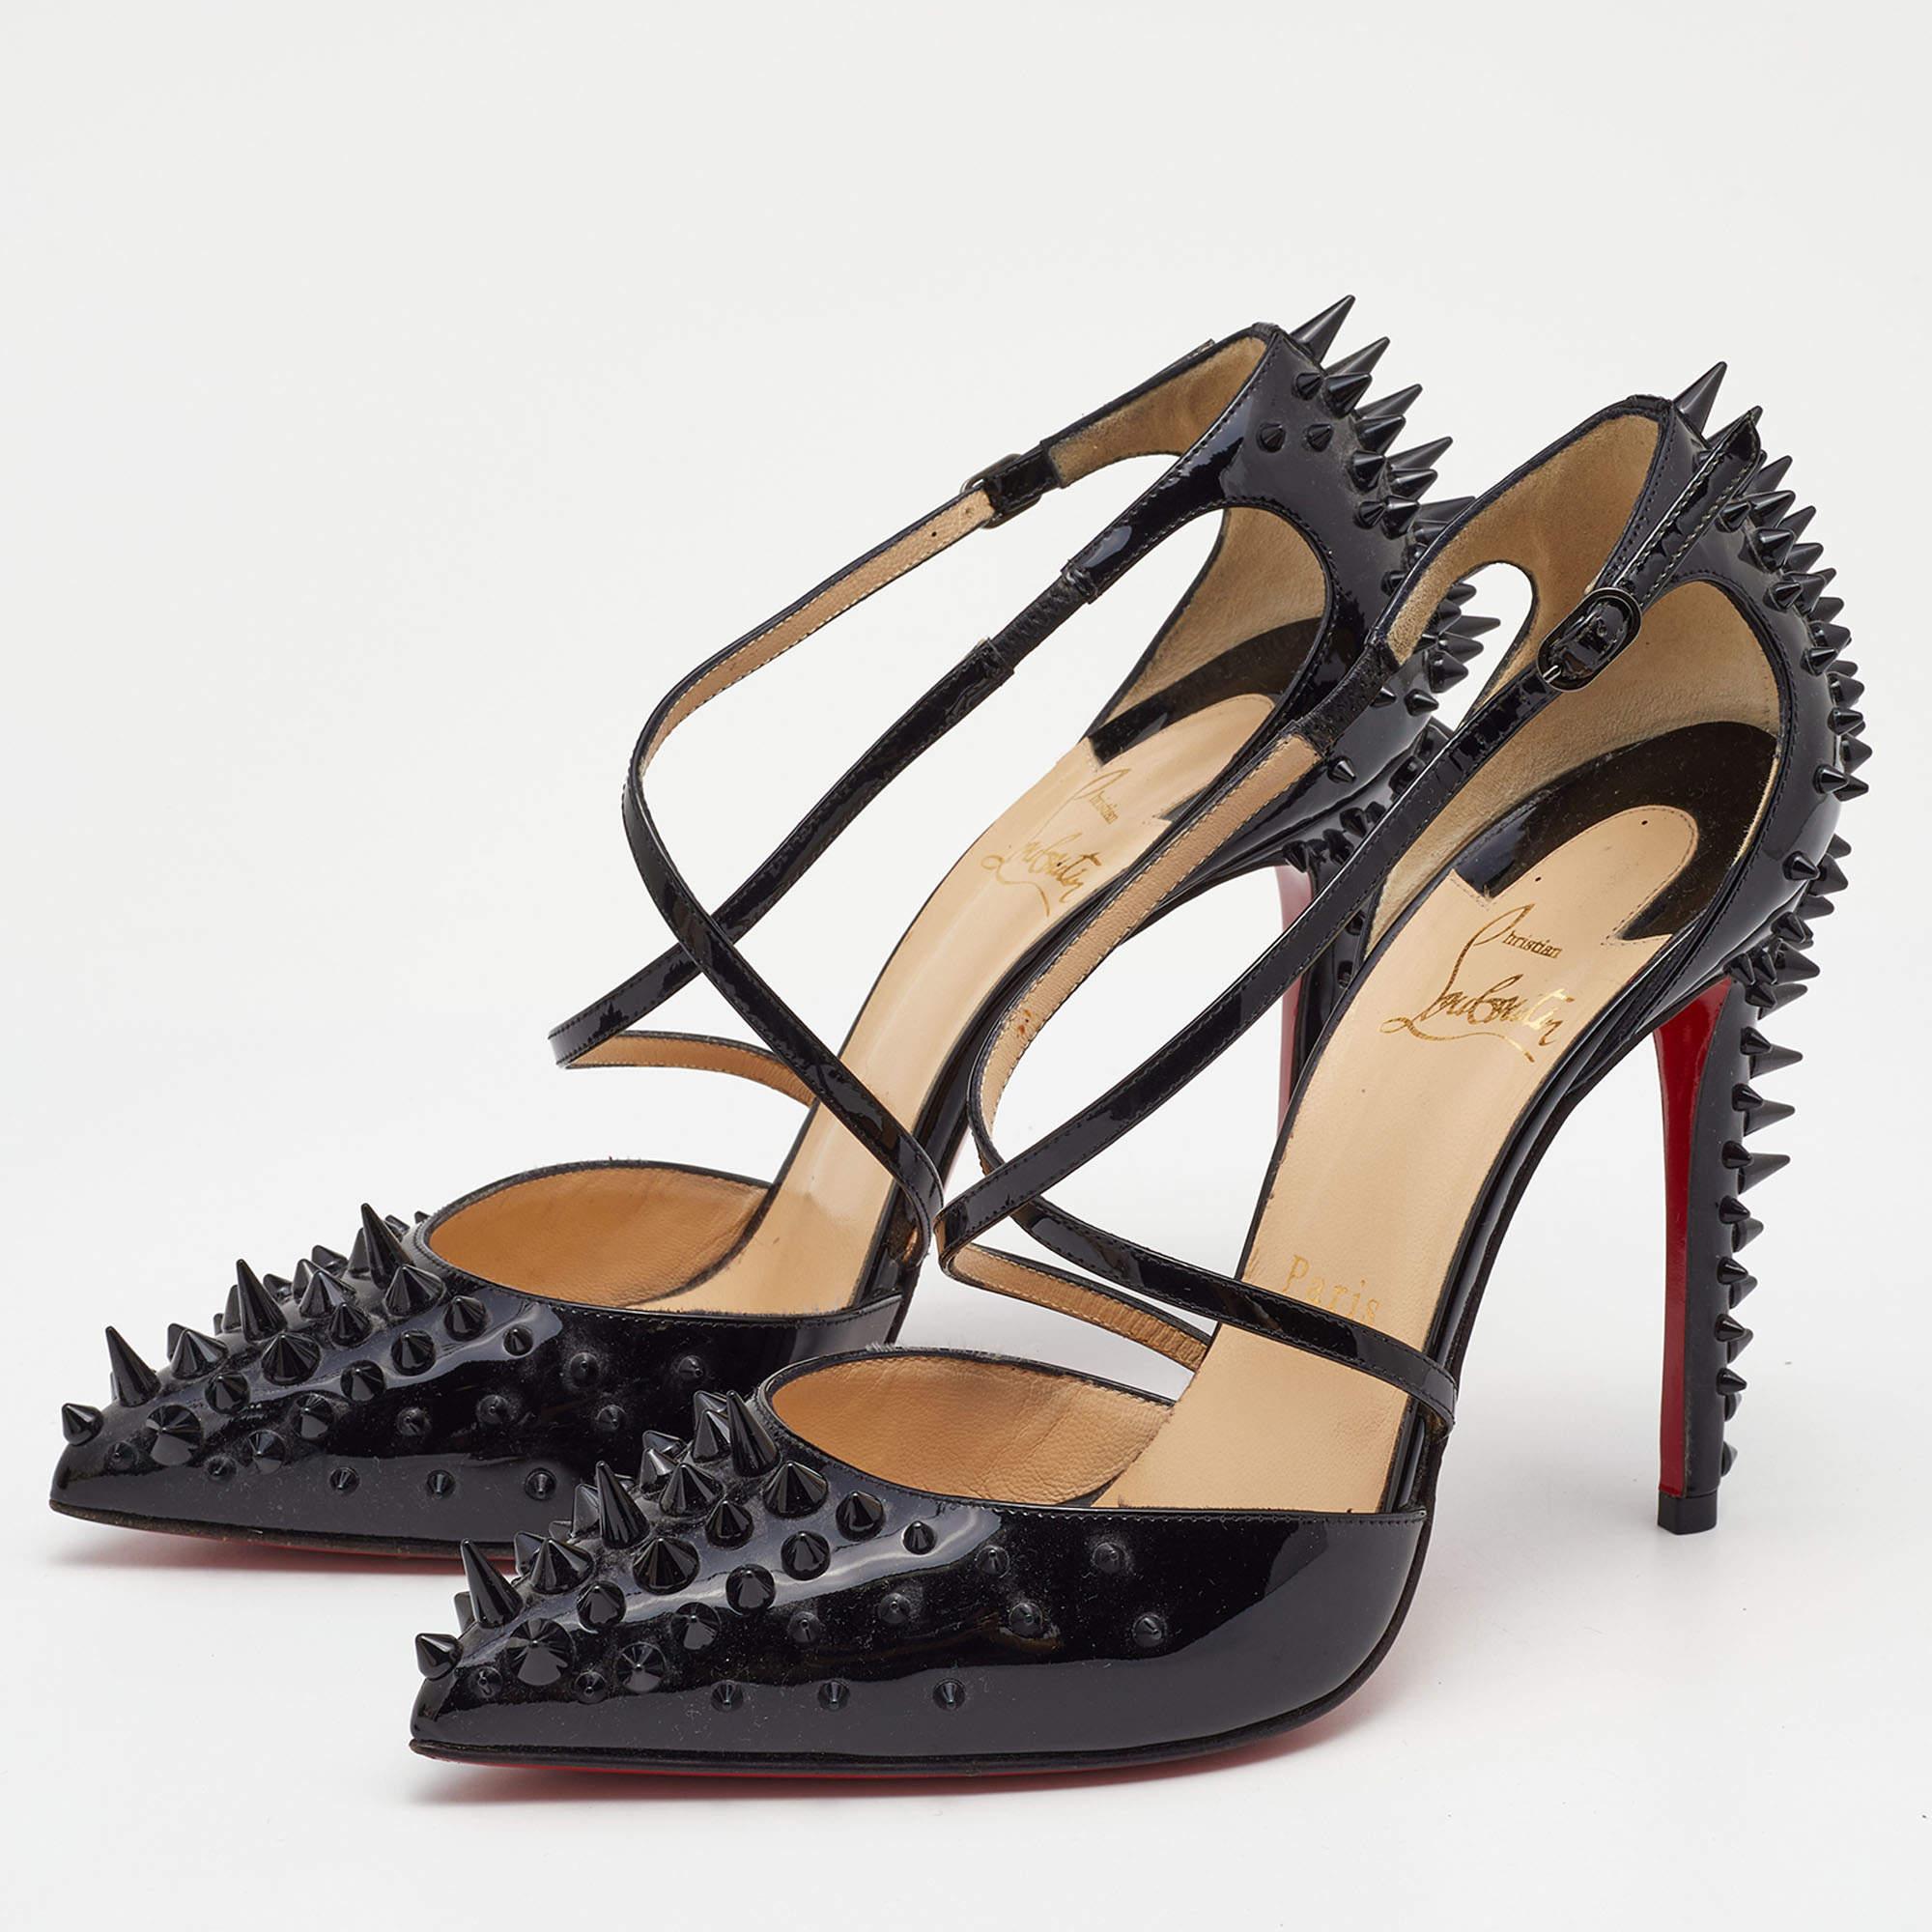 Rock these Christian Louboutin spike pumps at the next party! They have been crafted from patent leather into a criss-cross, ankle strap design and come with comfortable insoles. Gorgeously studded with unique spikes, you can team these bold 11.5 cm